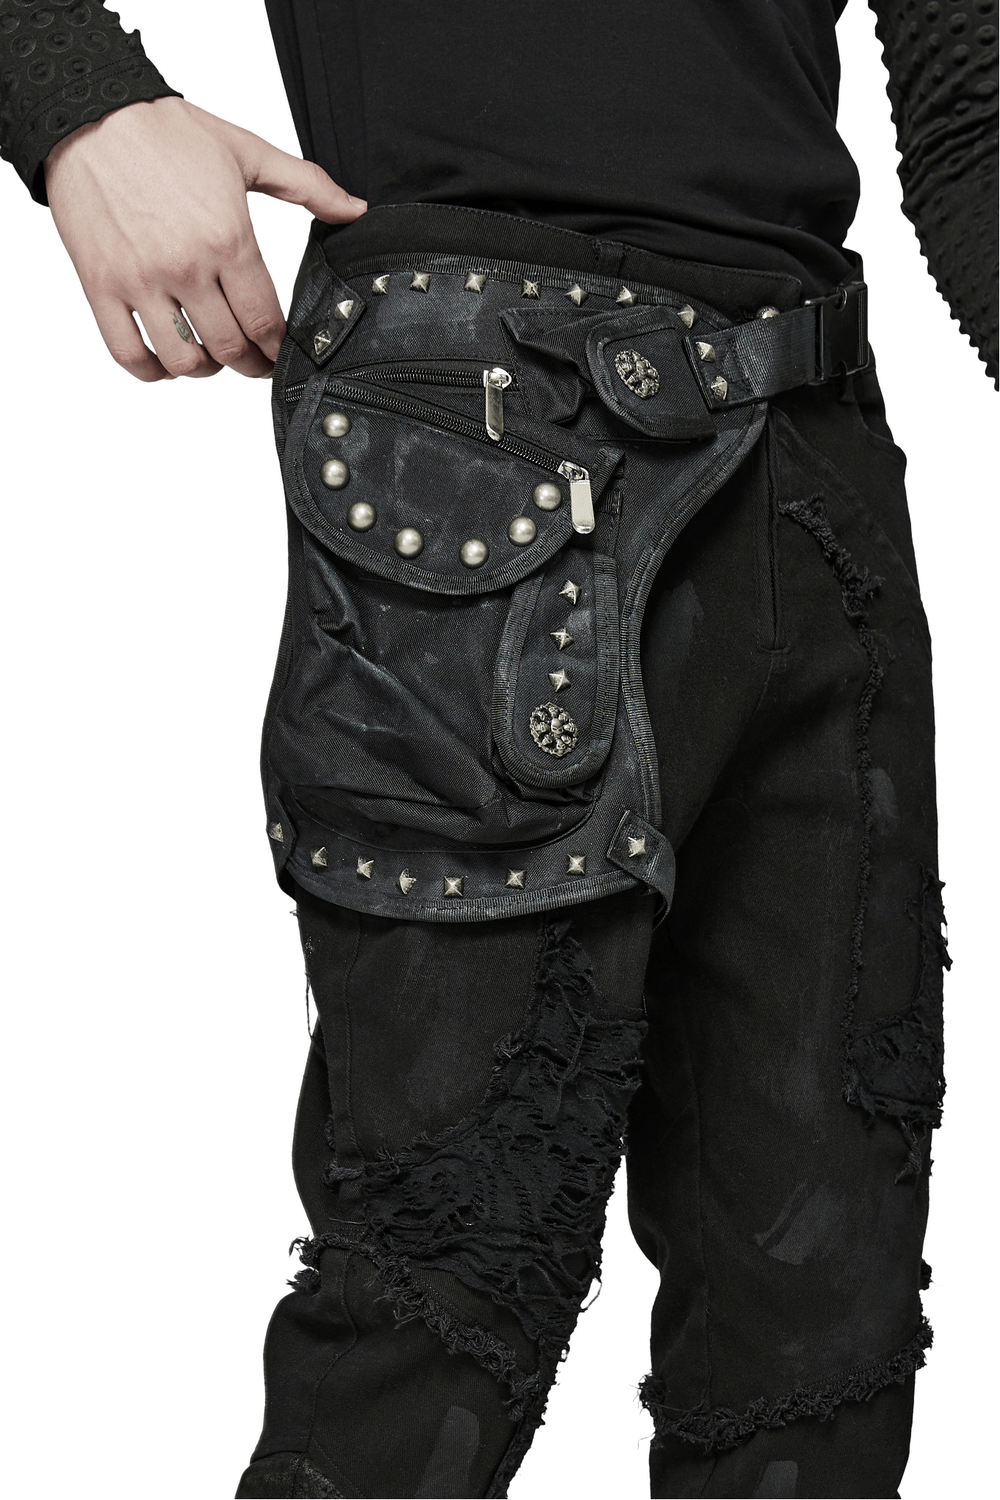 Edgy Punk Waist Bag with Adjustable Straps and Rivets